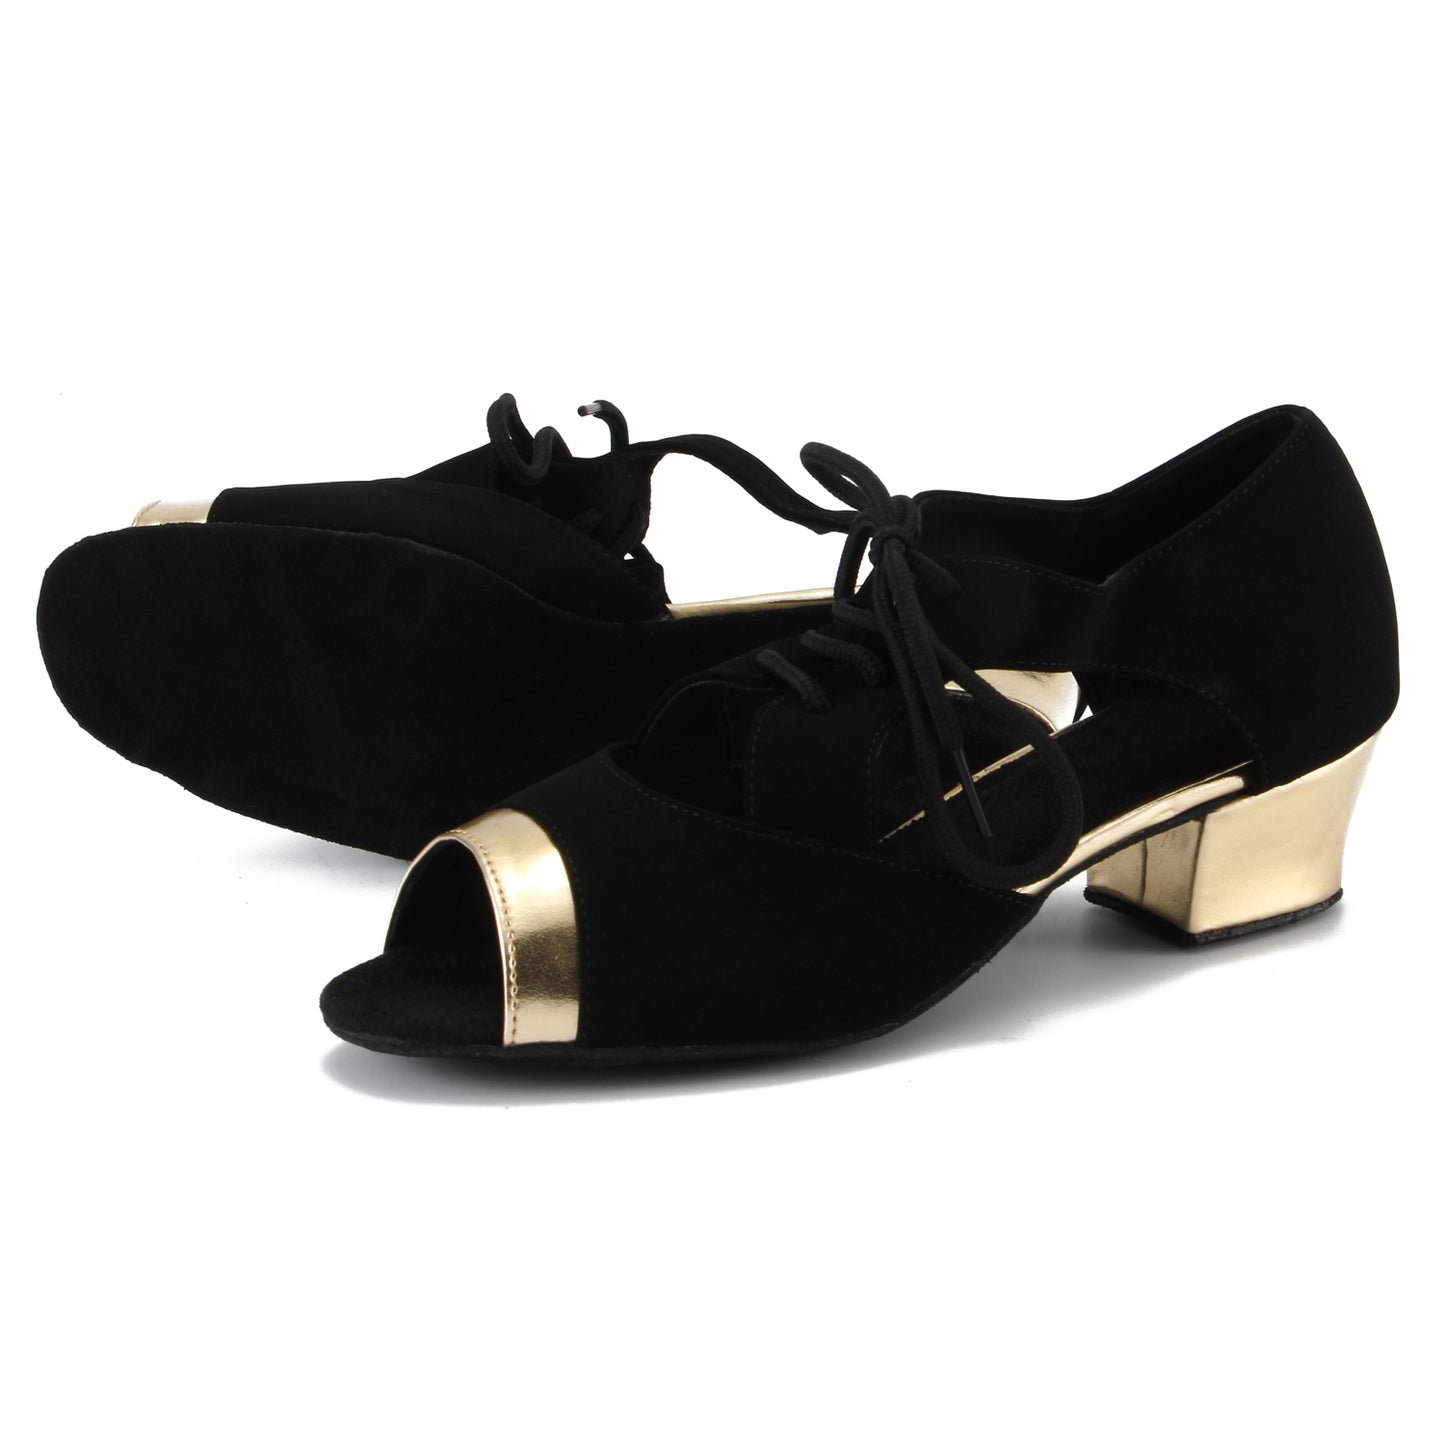 PD-3004-black and gold